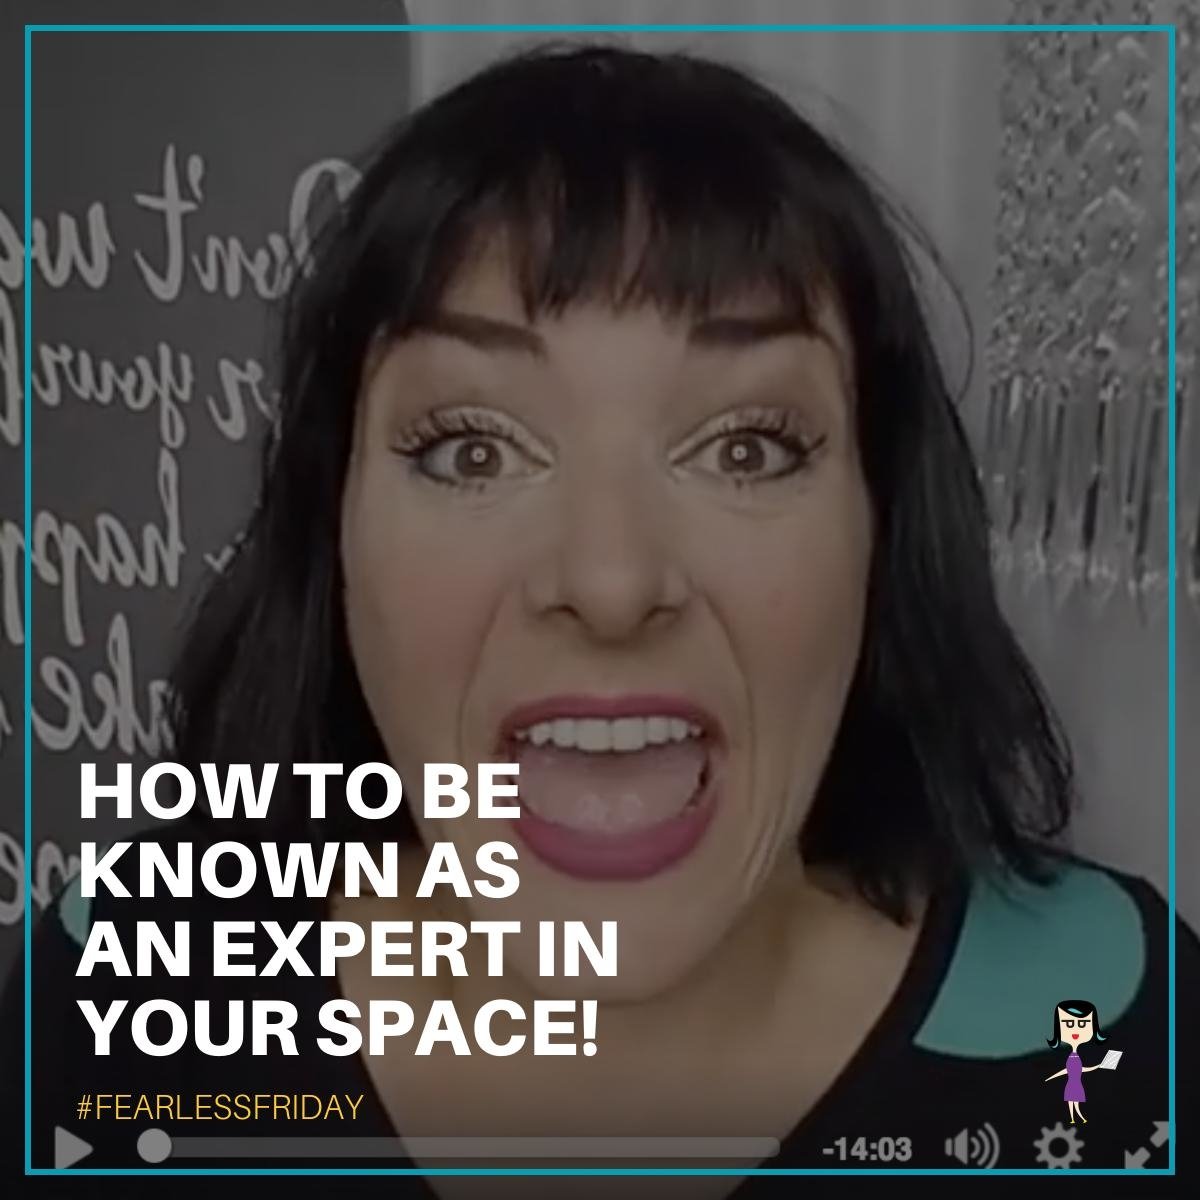 HOW TO BE KNOWN AS AN EXPERT IN YOUR SPACE